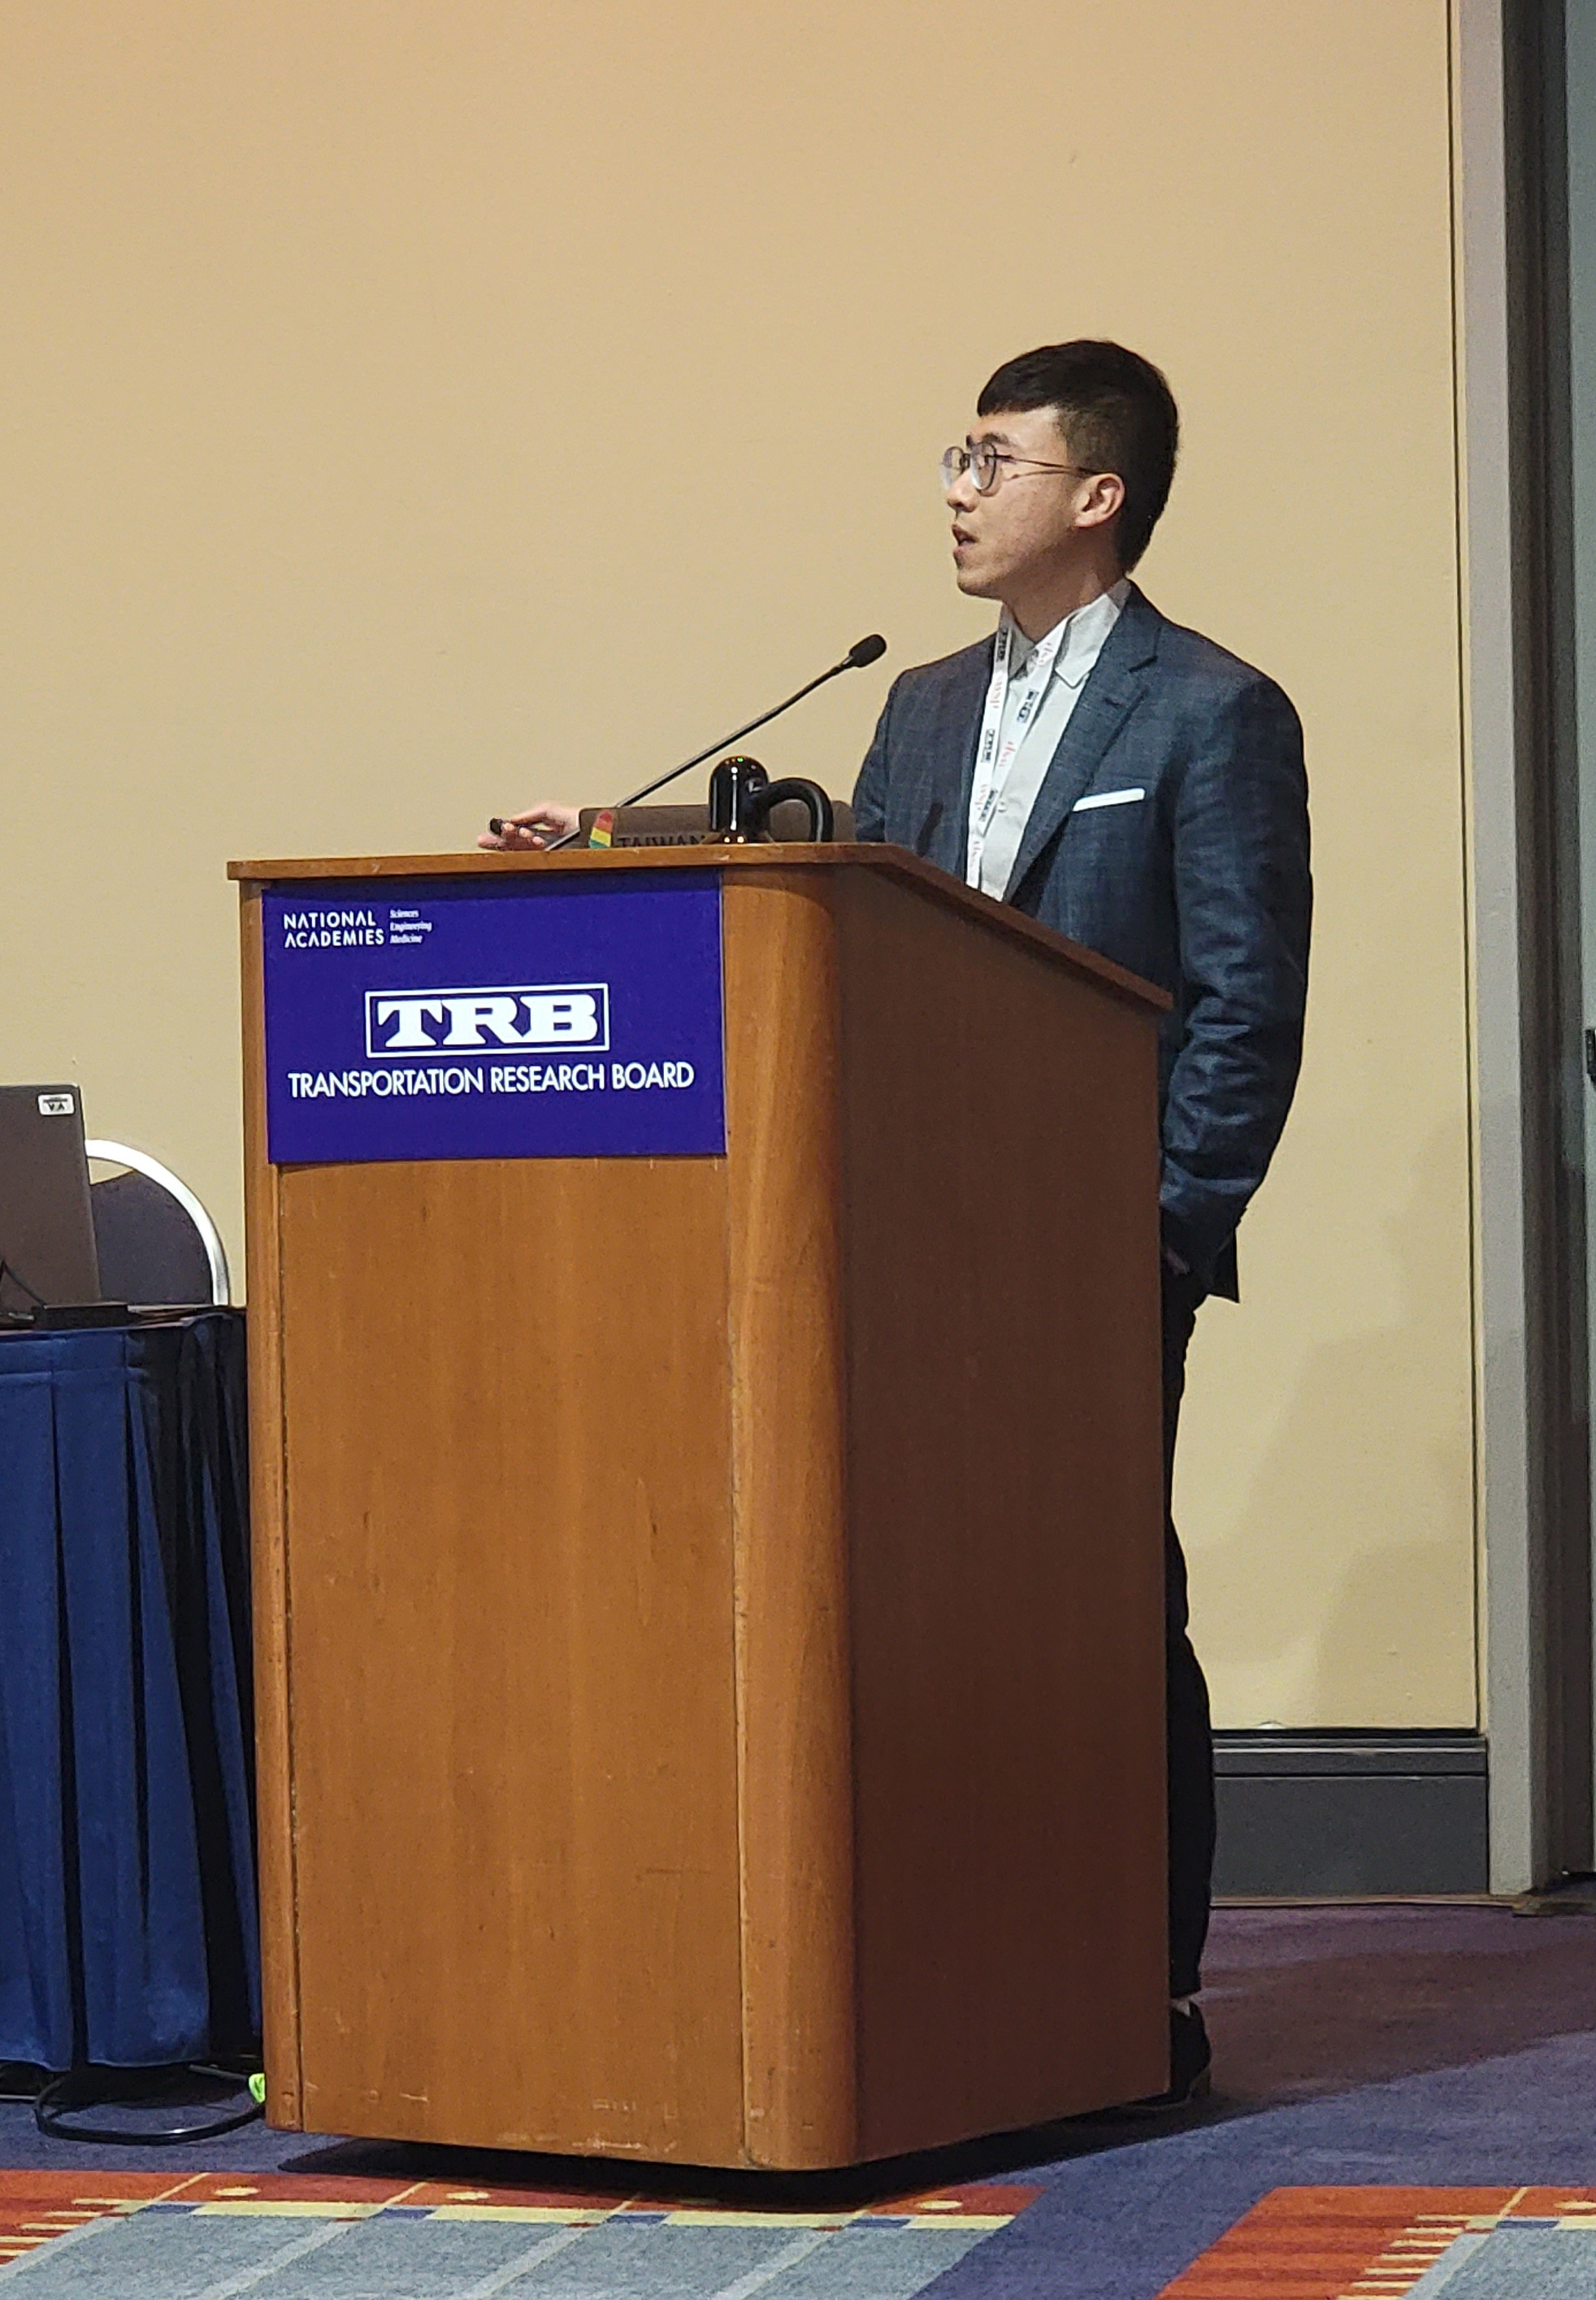 DCRP doctoral student Cheng-Kai Hsu talks about Kinematic Characterization of Risky Riding Behavior of On-Demand Food Delivery Motorcyclists in Taiwan